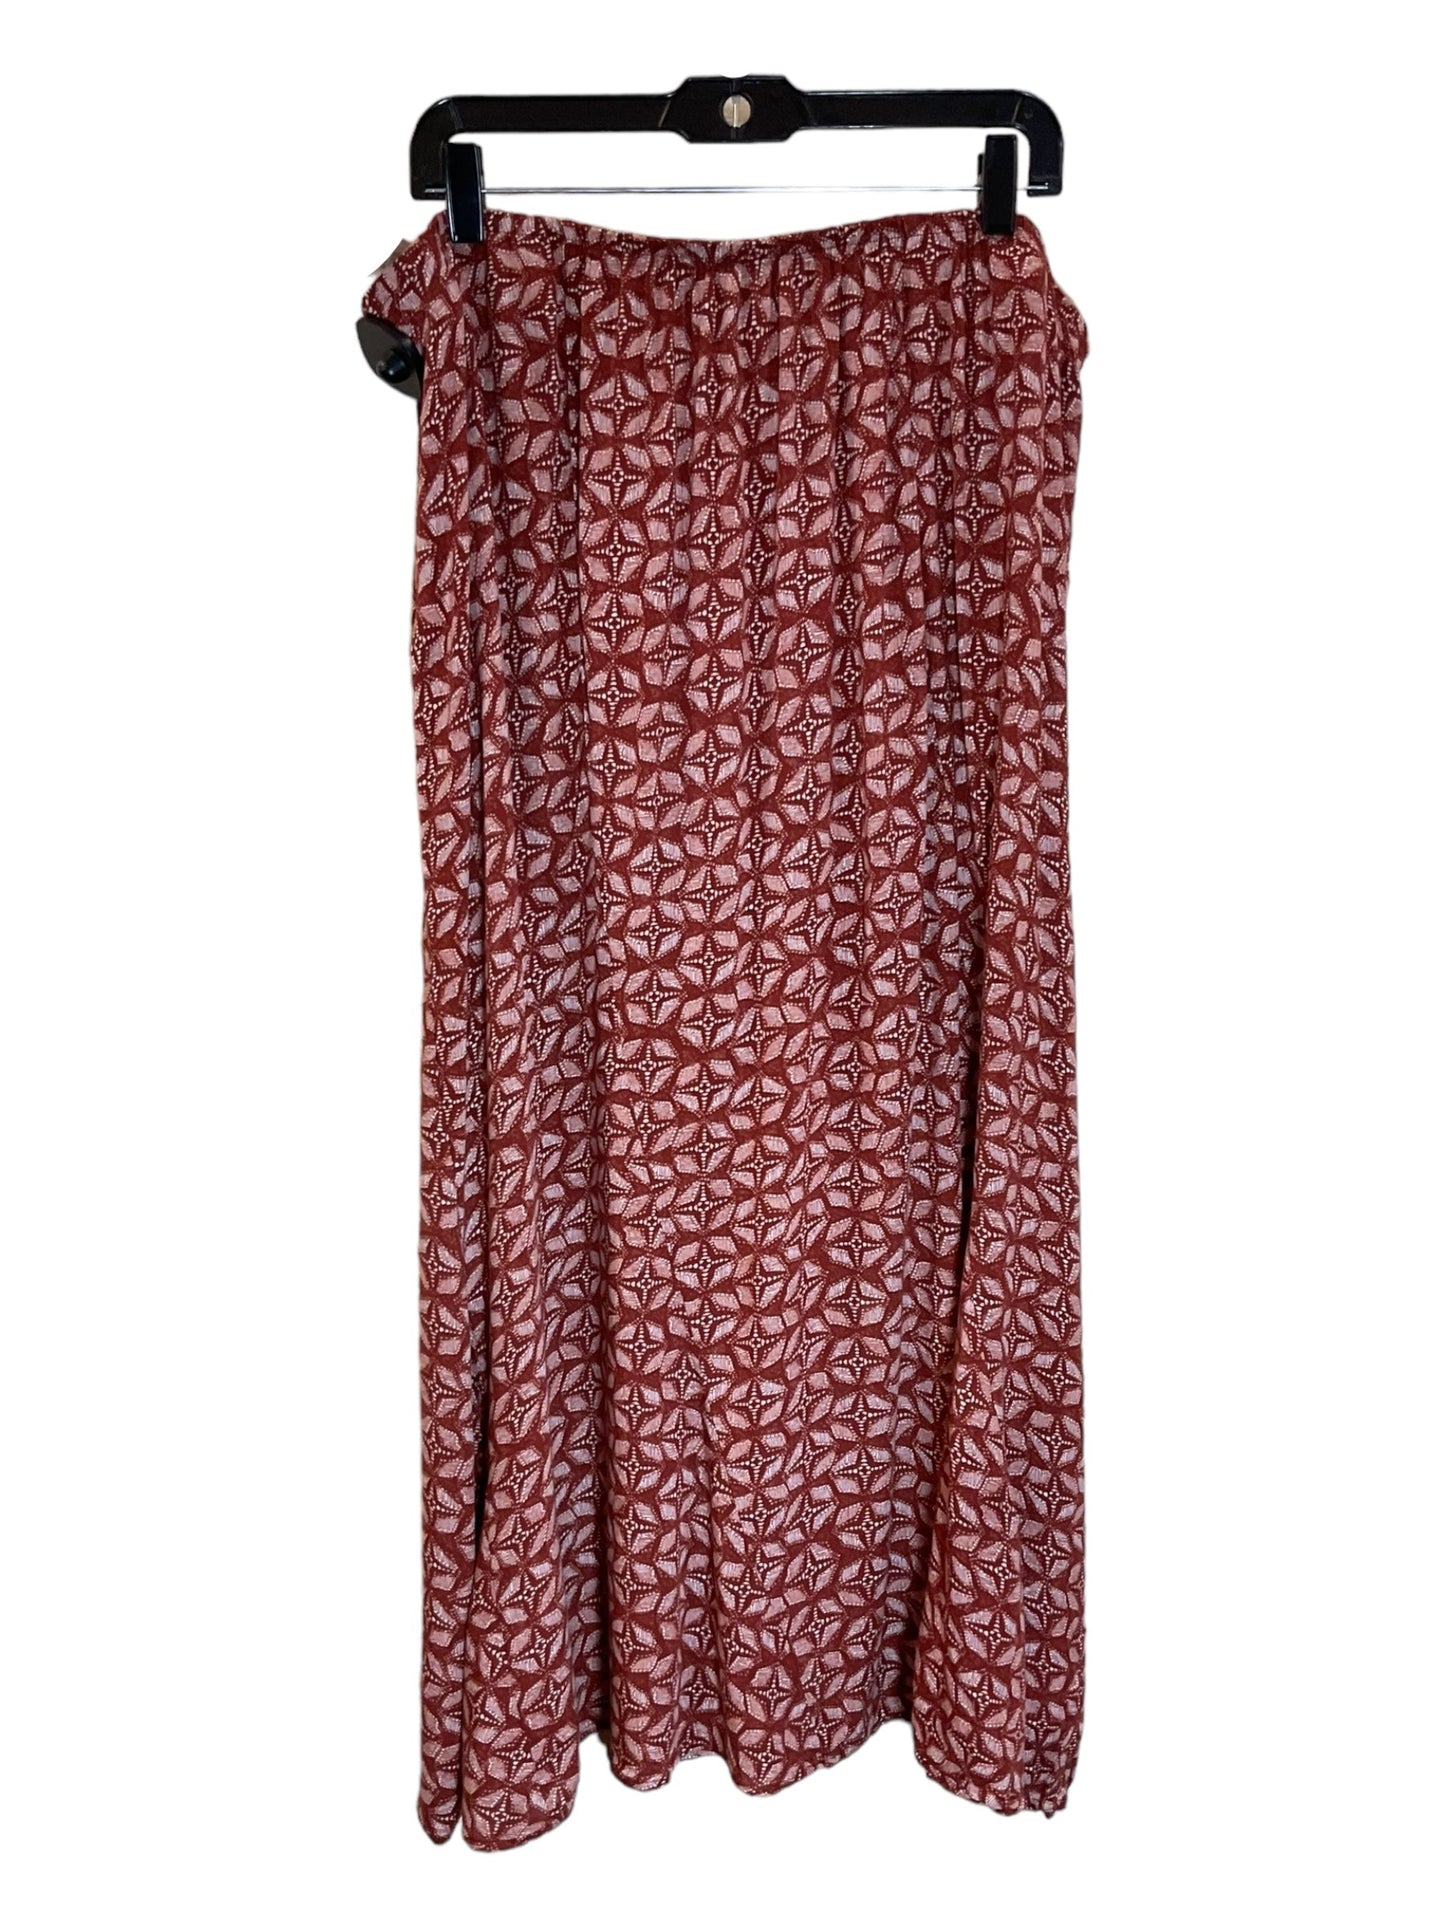 Rust Skirt Maxi Maurices O, Size 1x